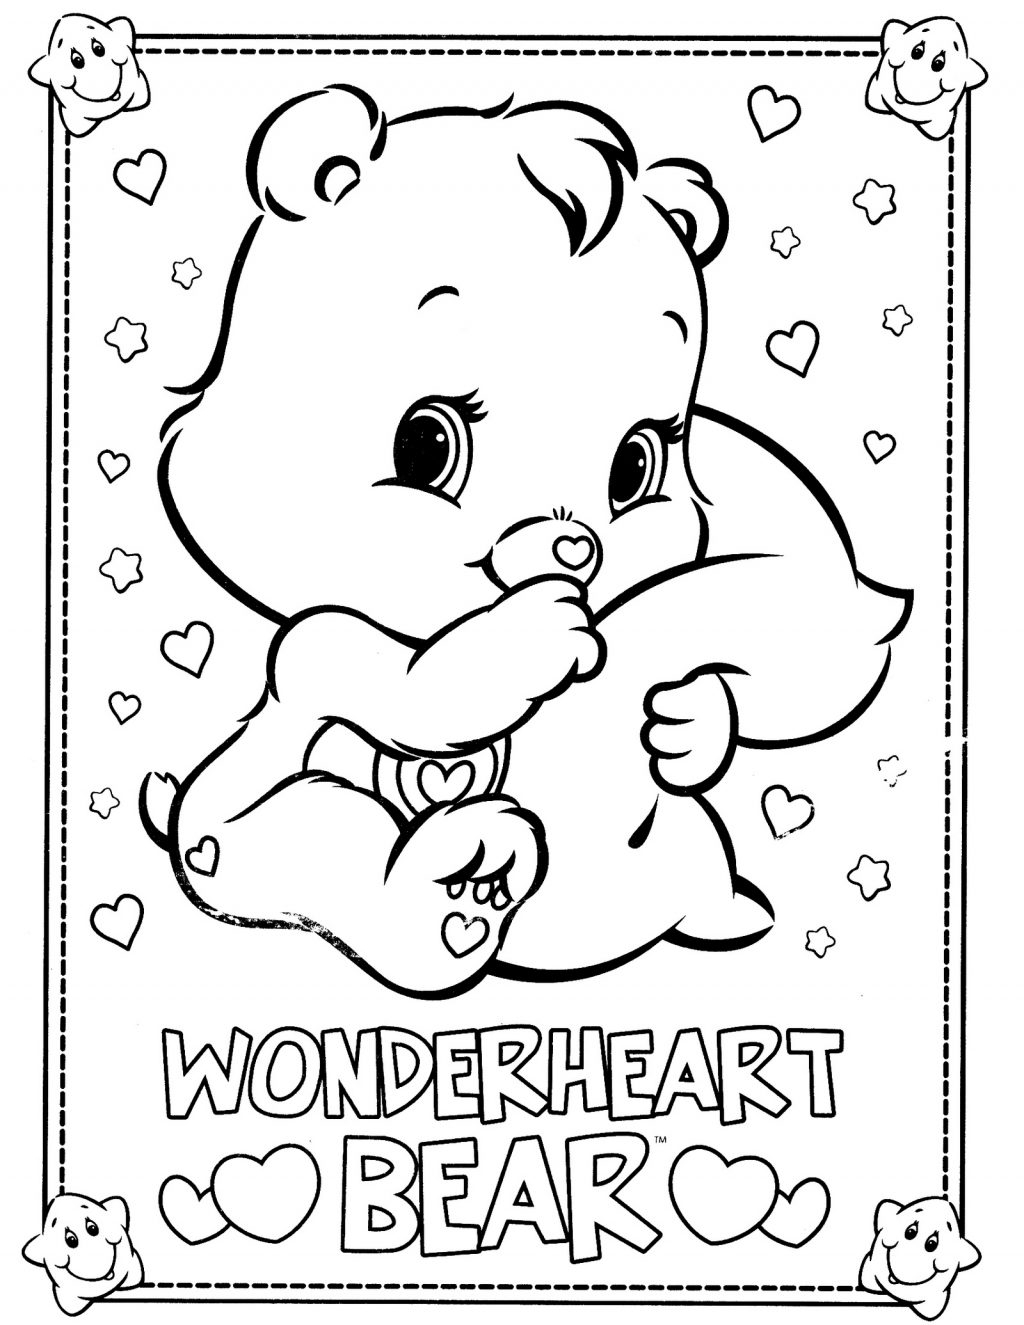 Bears Coloring Pages Coloring Page Wonderheart Bear From Care Bears Coloring Pages Book